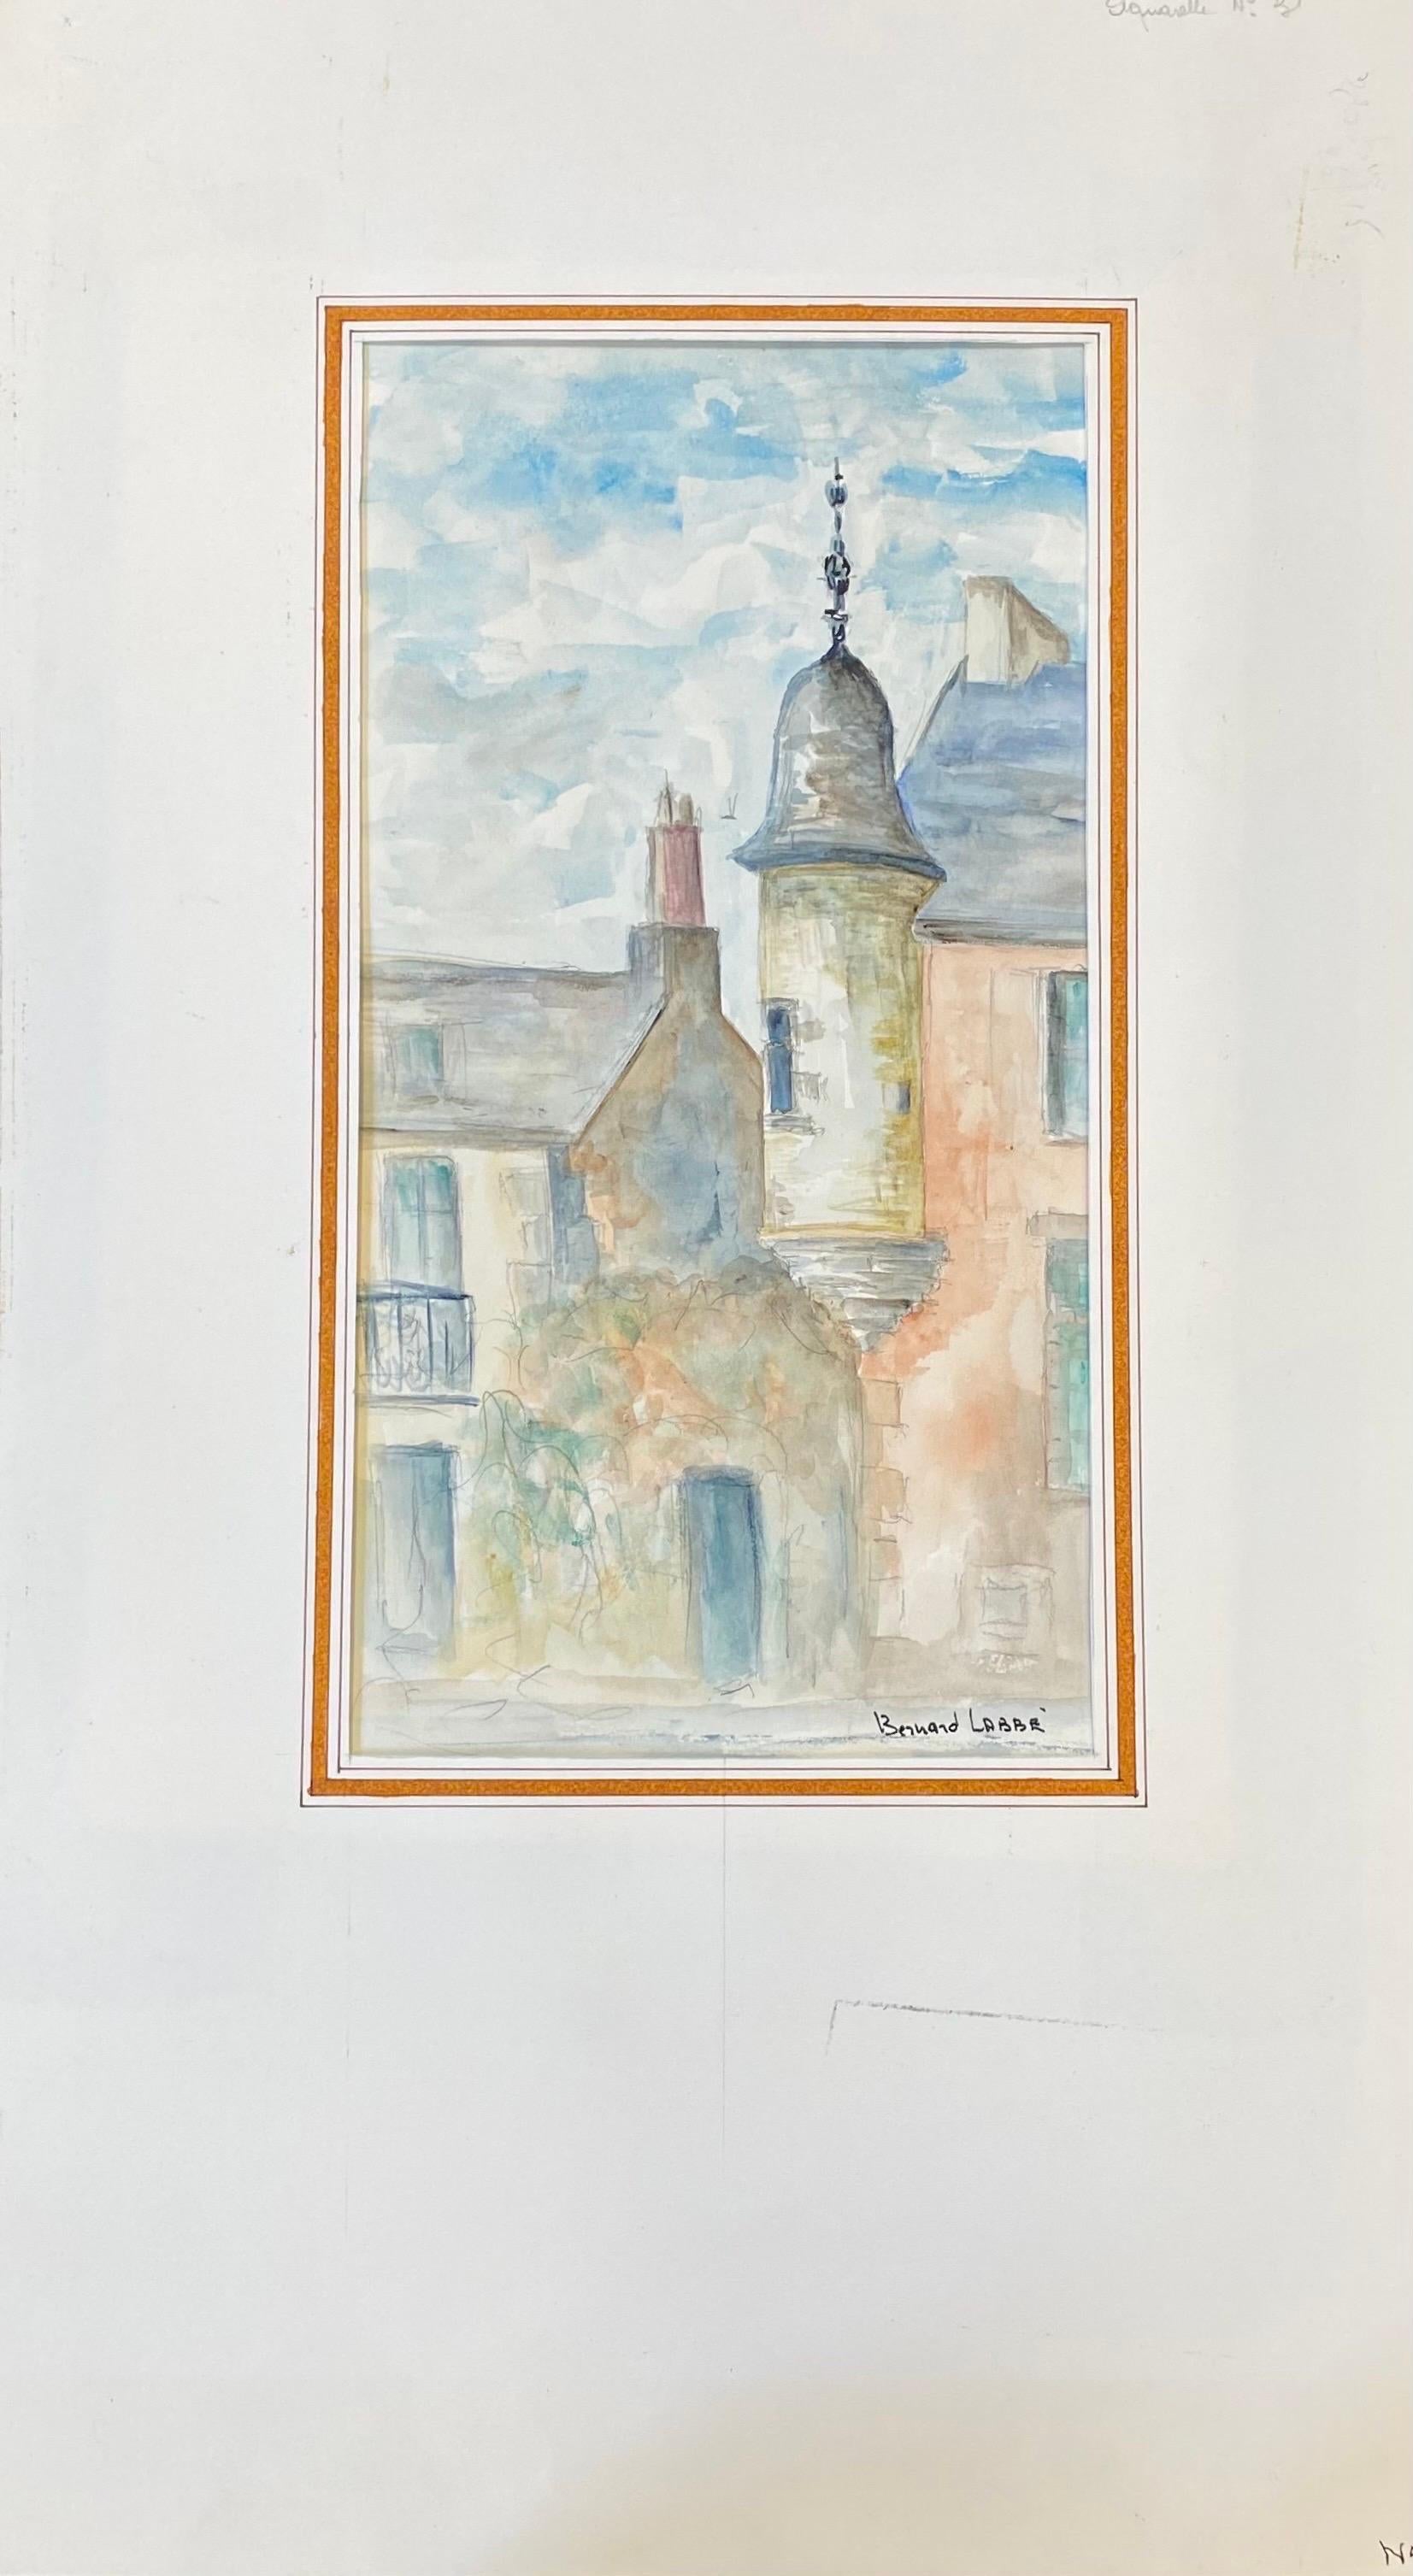 French landscape
by Bernard Labbe (French mid 20th century)
Signed original watercolour/ gouache painting on artist paper, mounted on card, unframed
Size: 18.5 x 10.75 inches
Condition: very good and ready to be enjoyed. 

Provenance: the